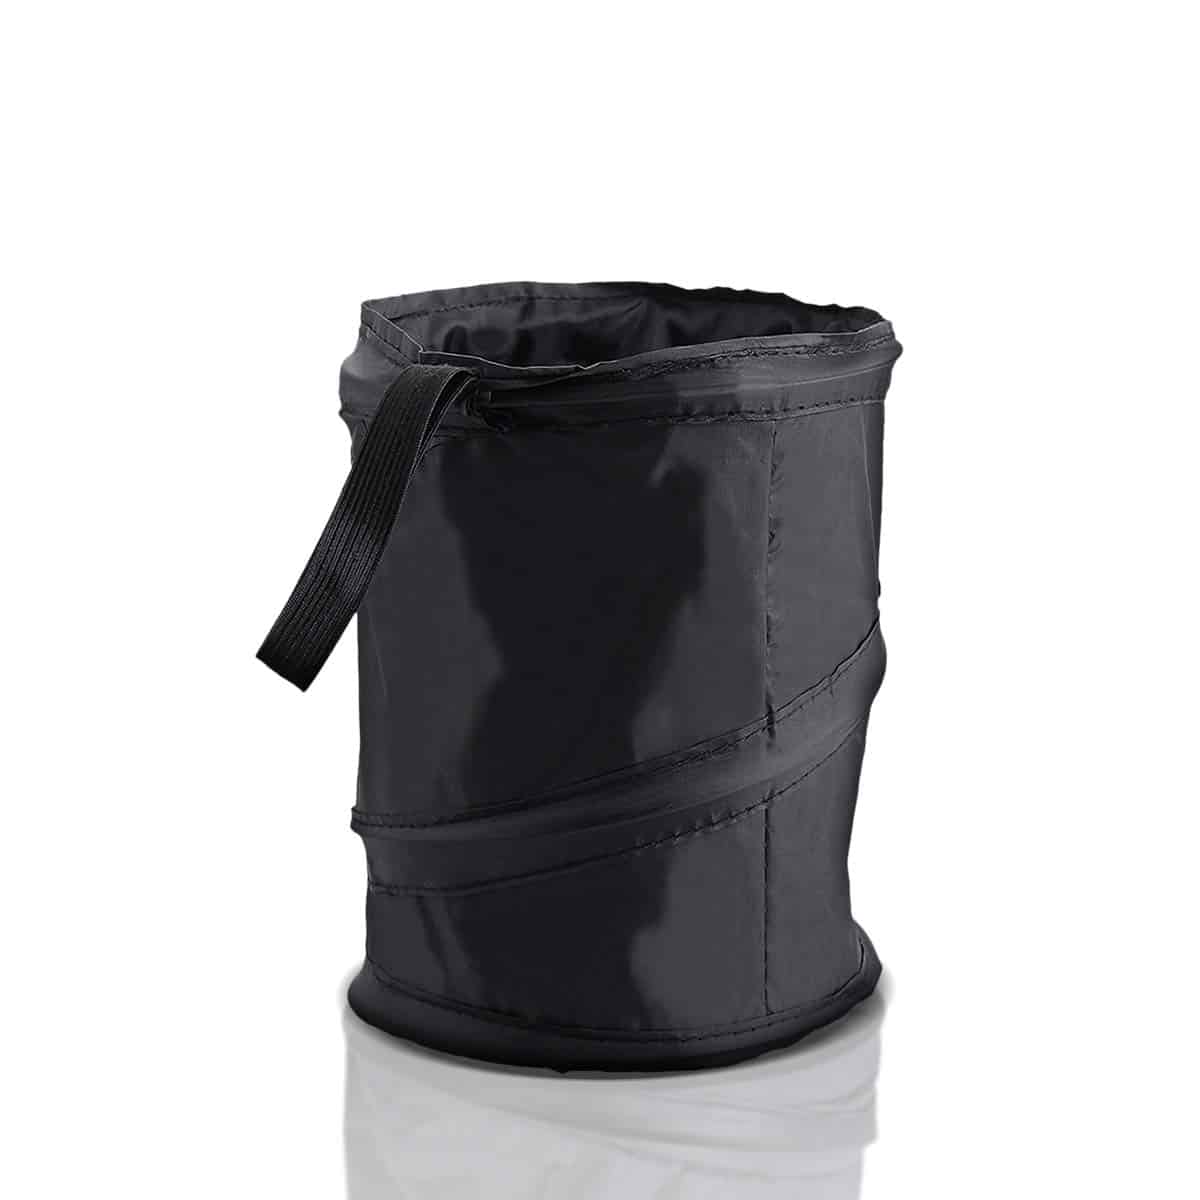 Collapsible Zone Tech Universal Portable Trash Can